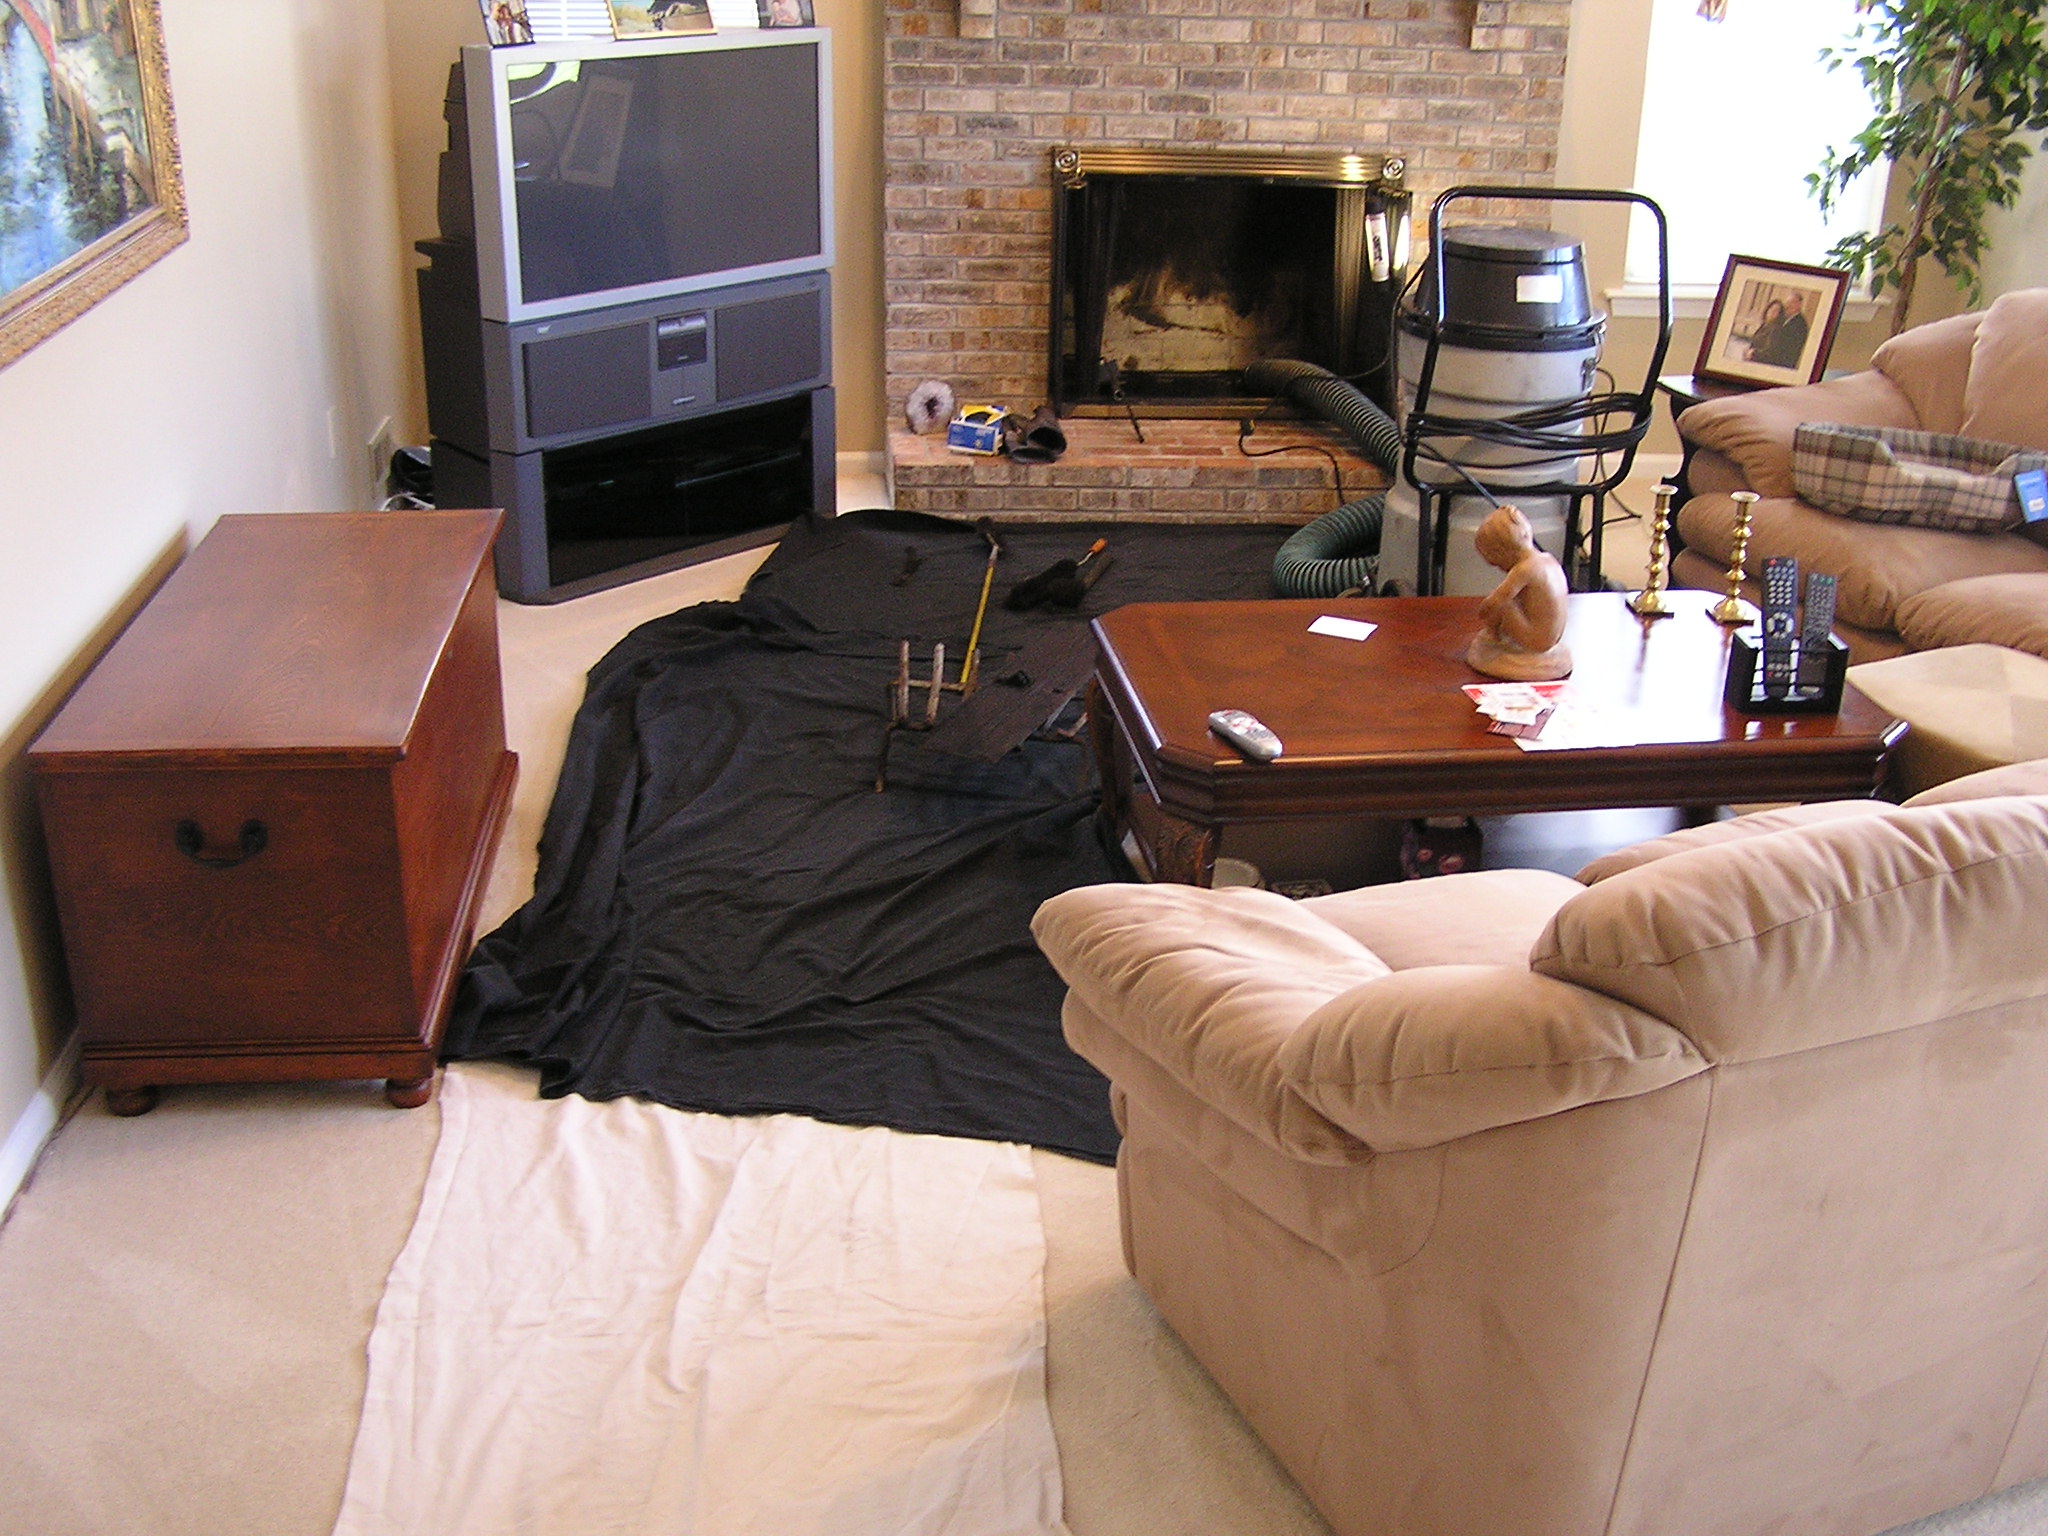 Floor protection is used from where we enter your home to the service are.  Keeps your home clean and protected.